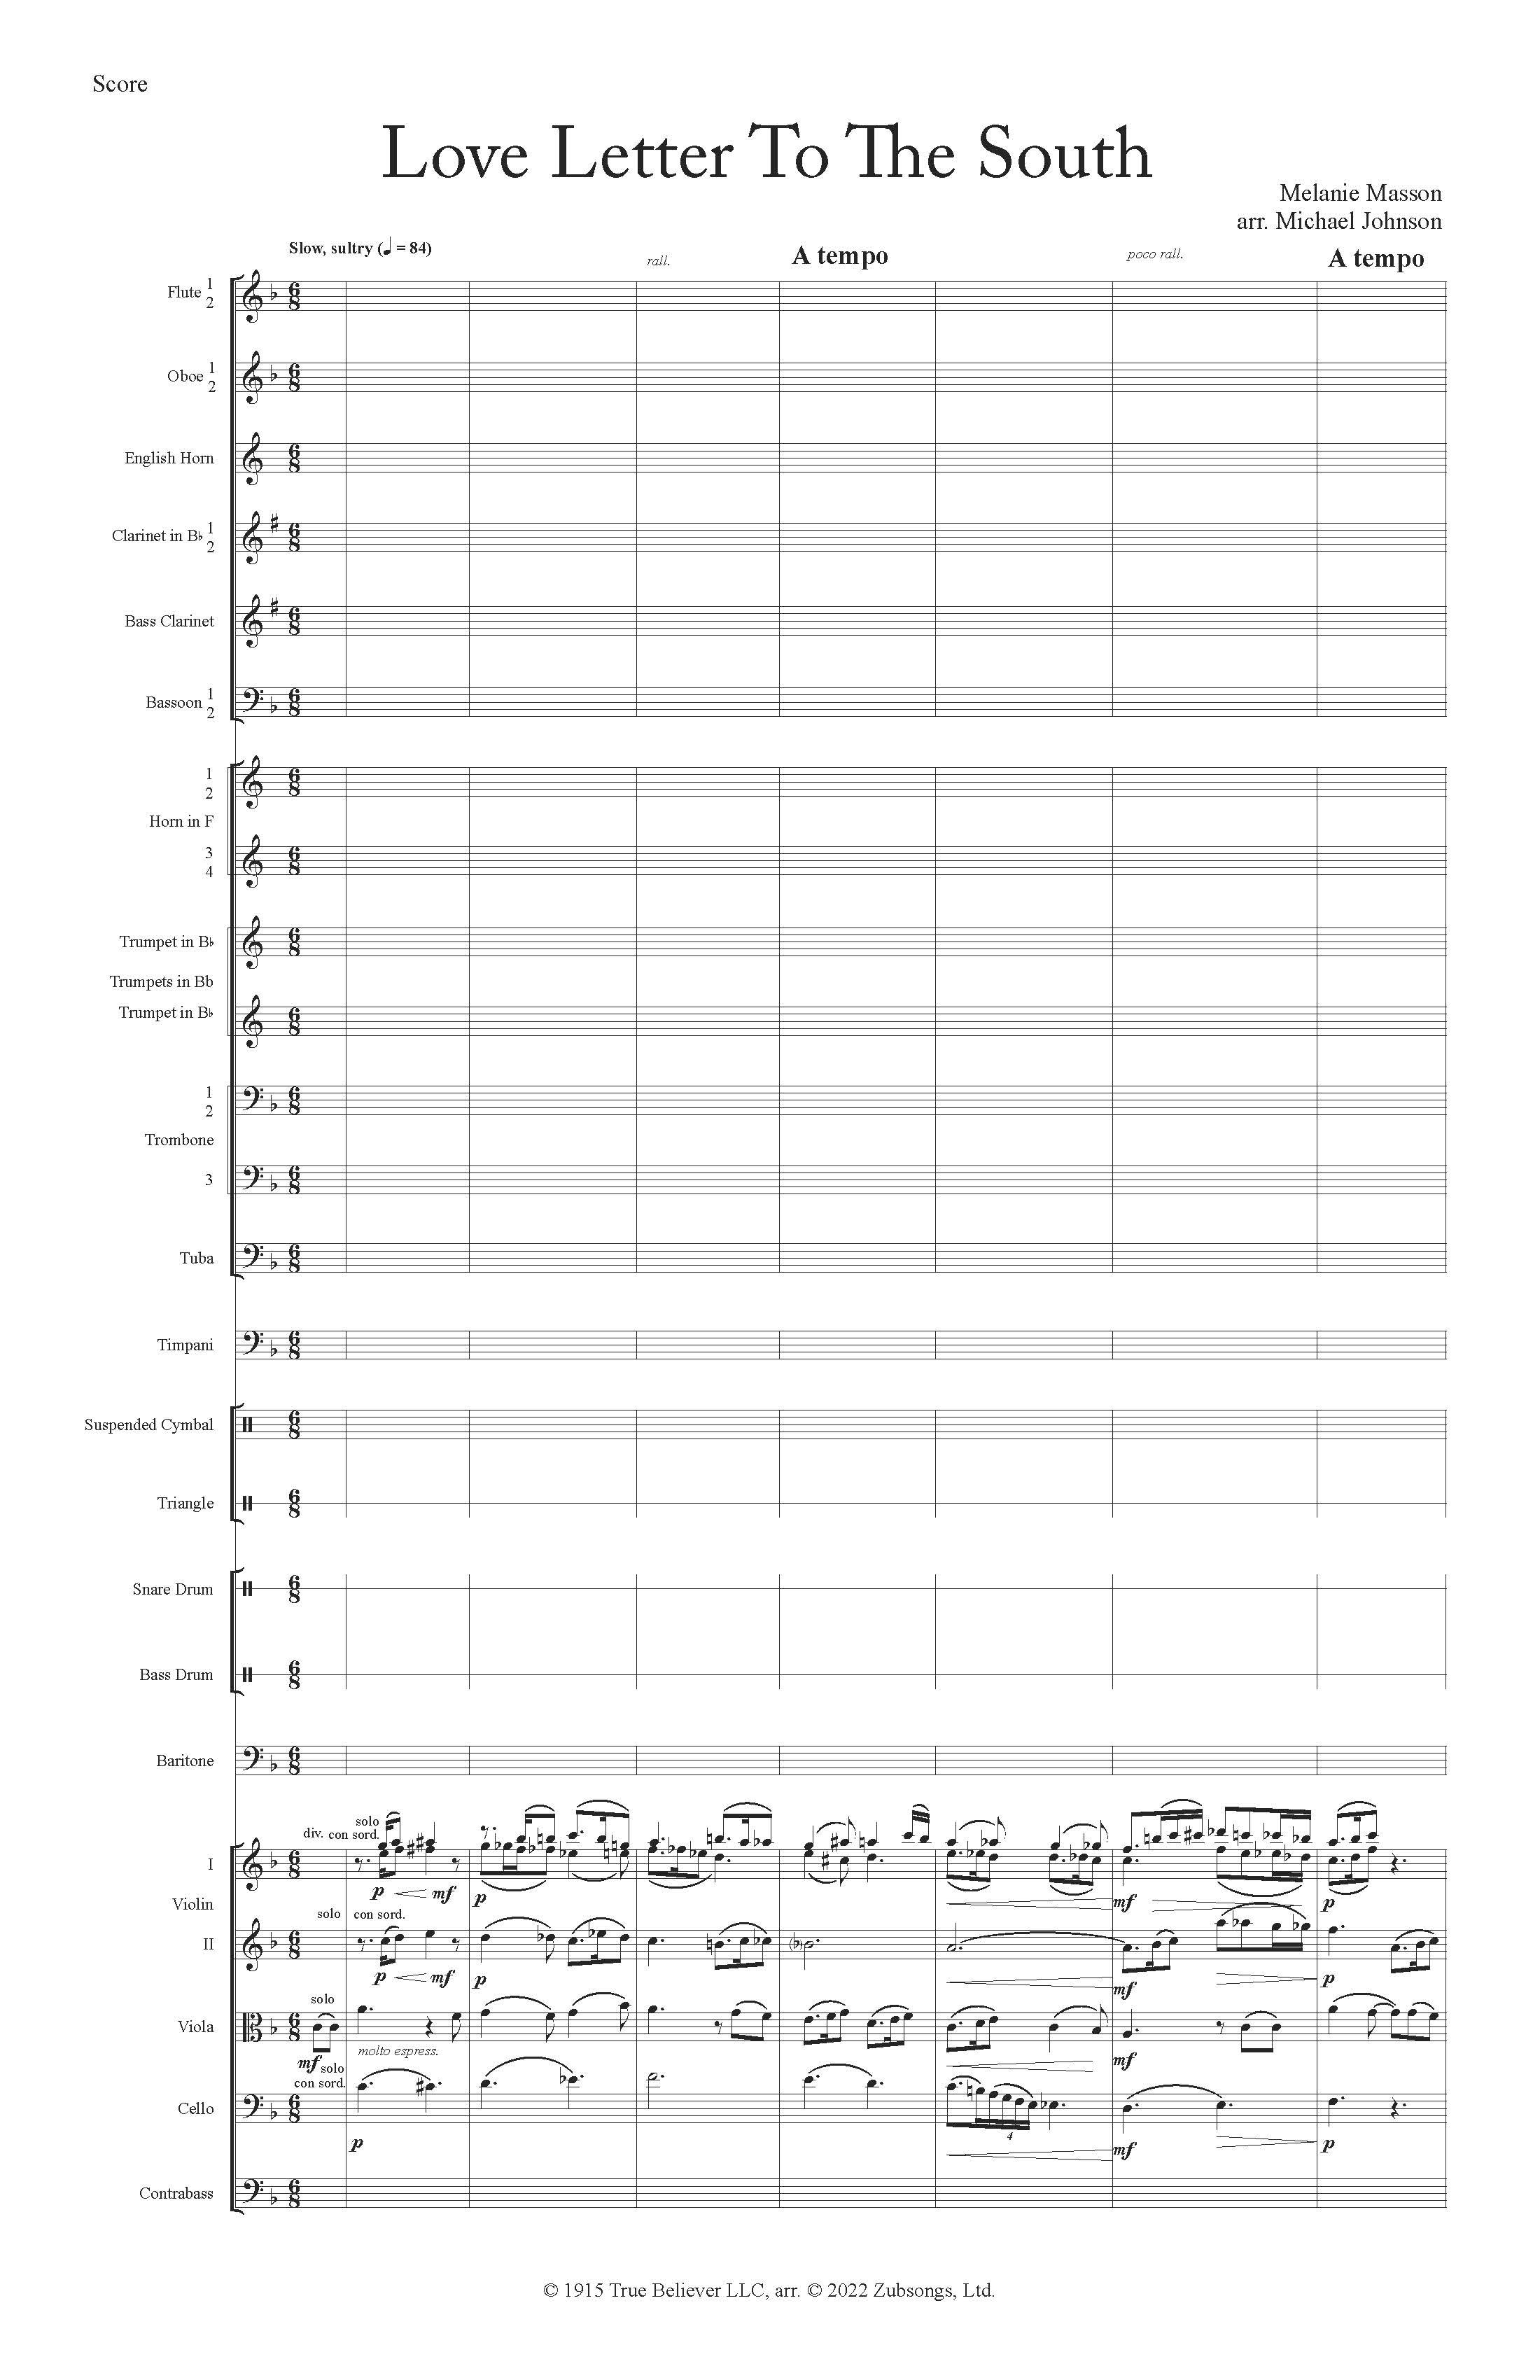 LOVE LETTER TO THE SOUTH ORCH - Score_Page_01.jpg